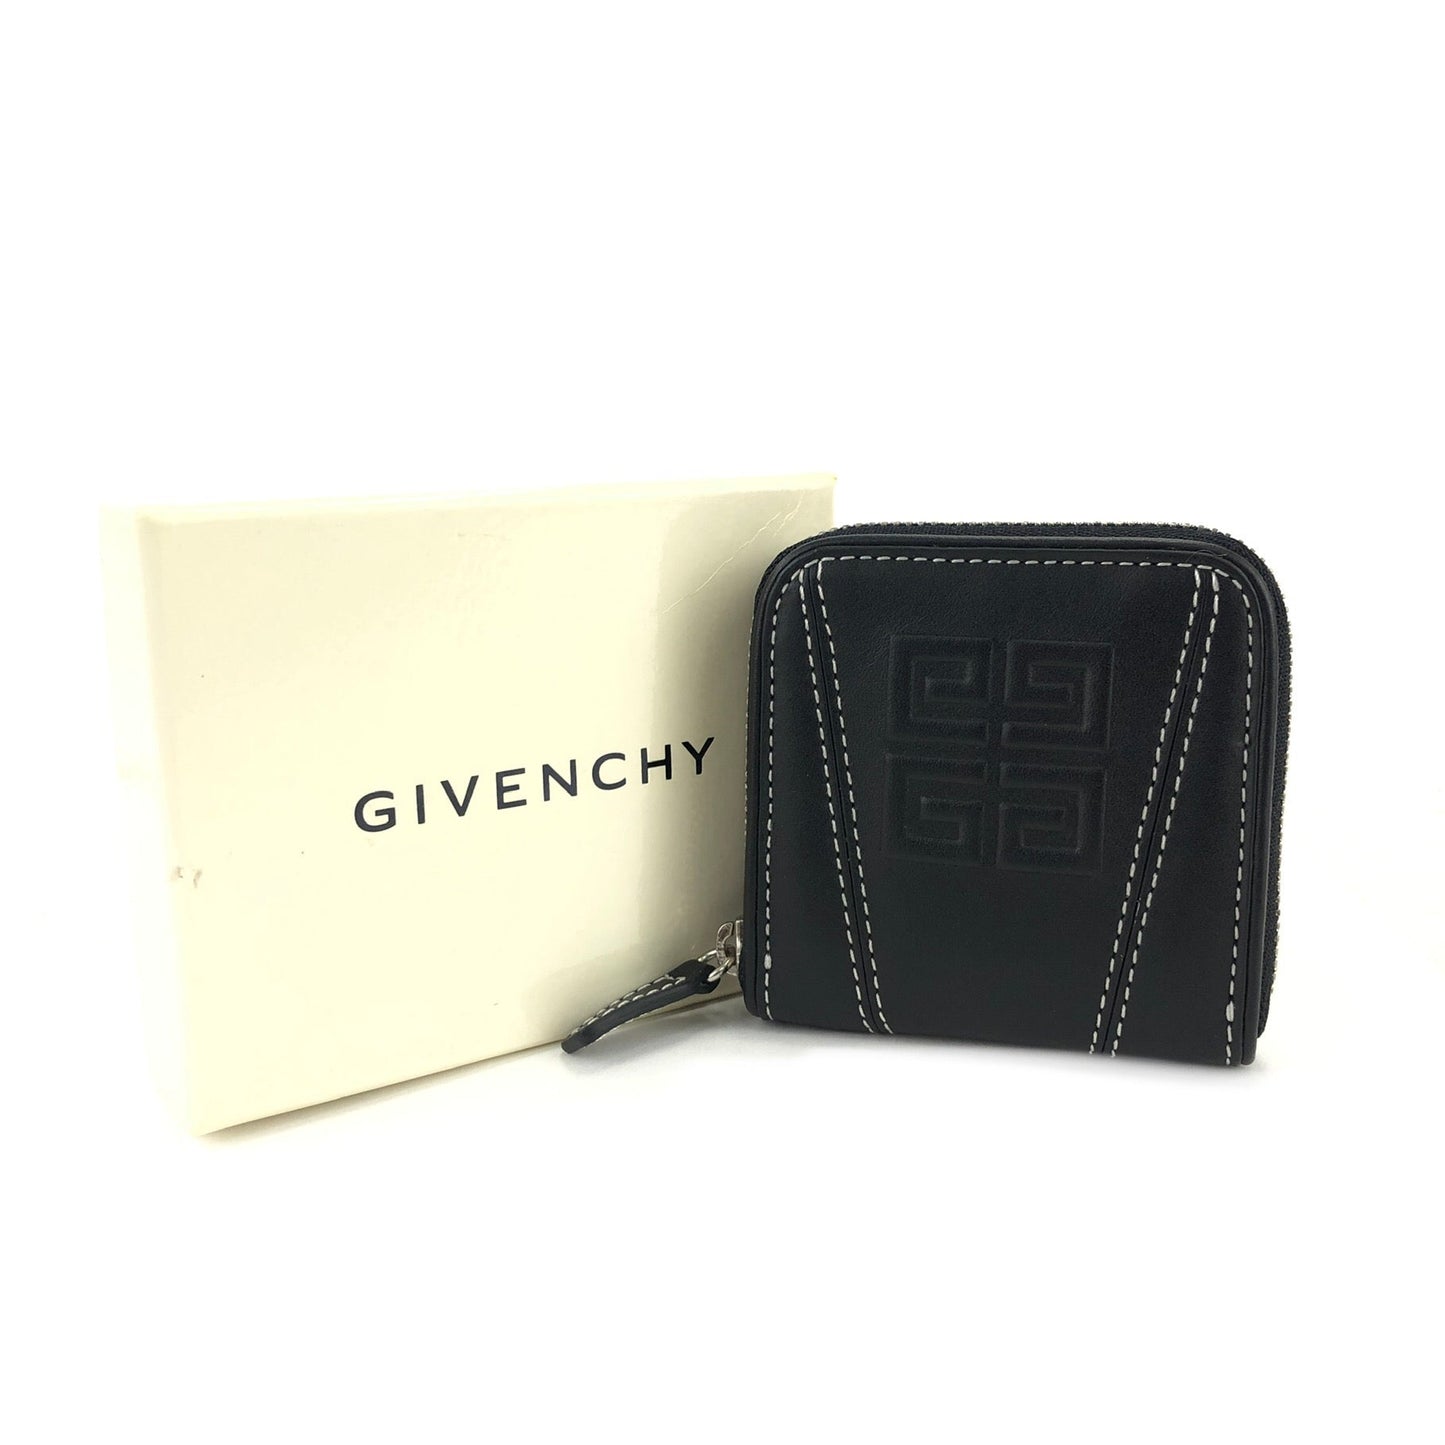 Givenchy Logo Stitch Leather Compact Wallet Mini Coin case Black Vintage Old 6dukrg